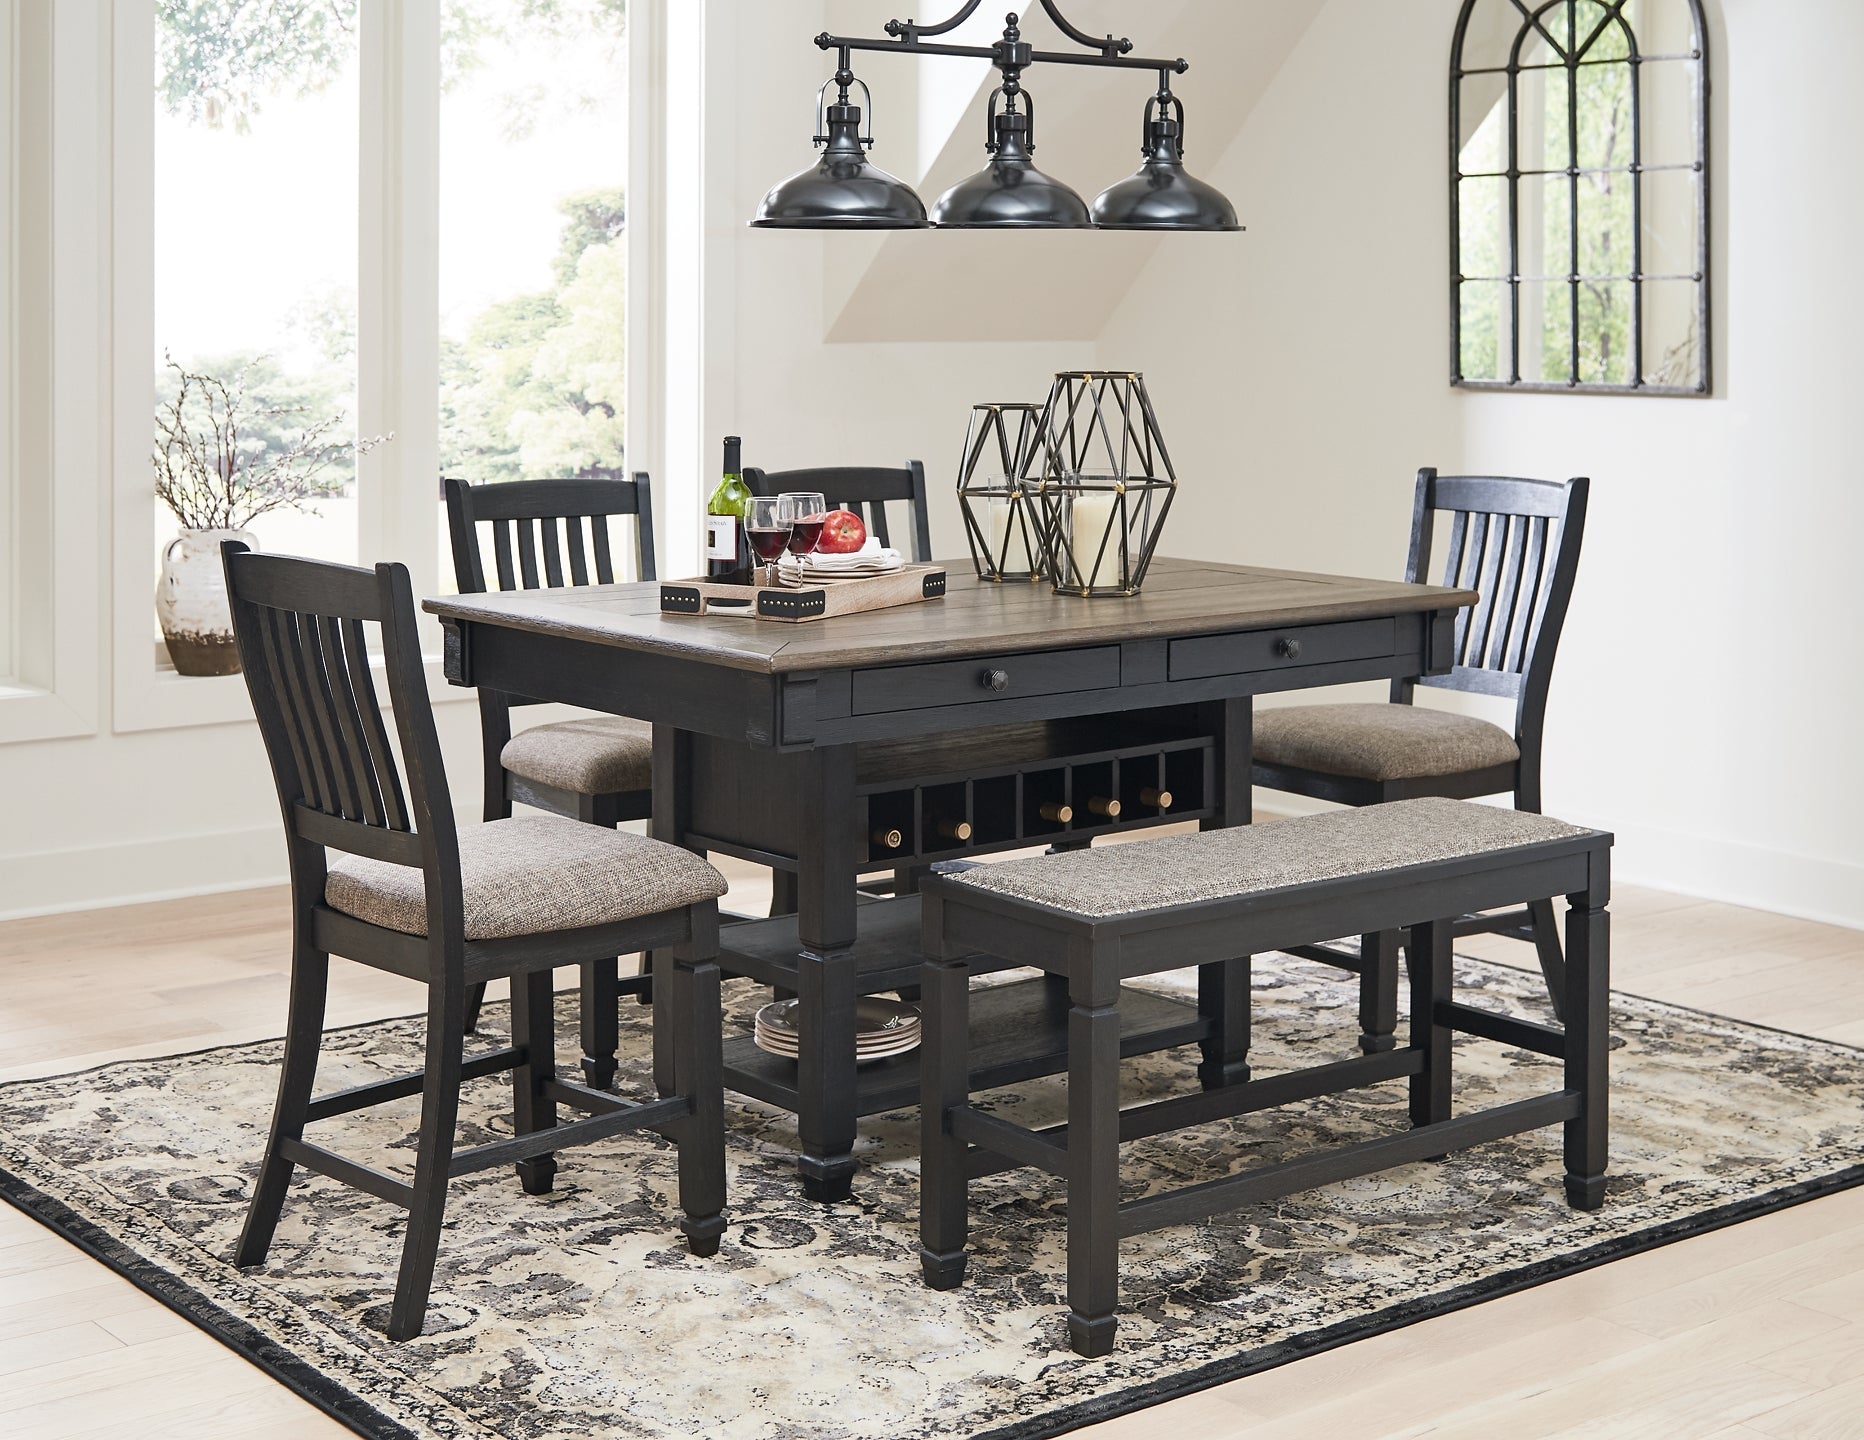 Tyler Creek Counter Height Dining Table and 4 Barstools and Bench at Walker Mattress and Furniture Locations in Cedar Park and Belton TX.